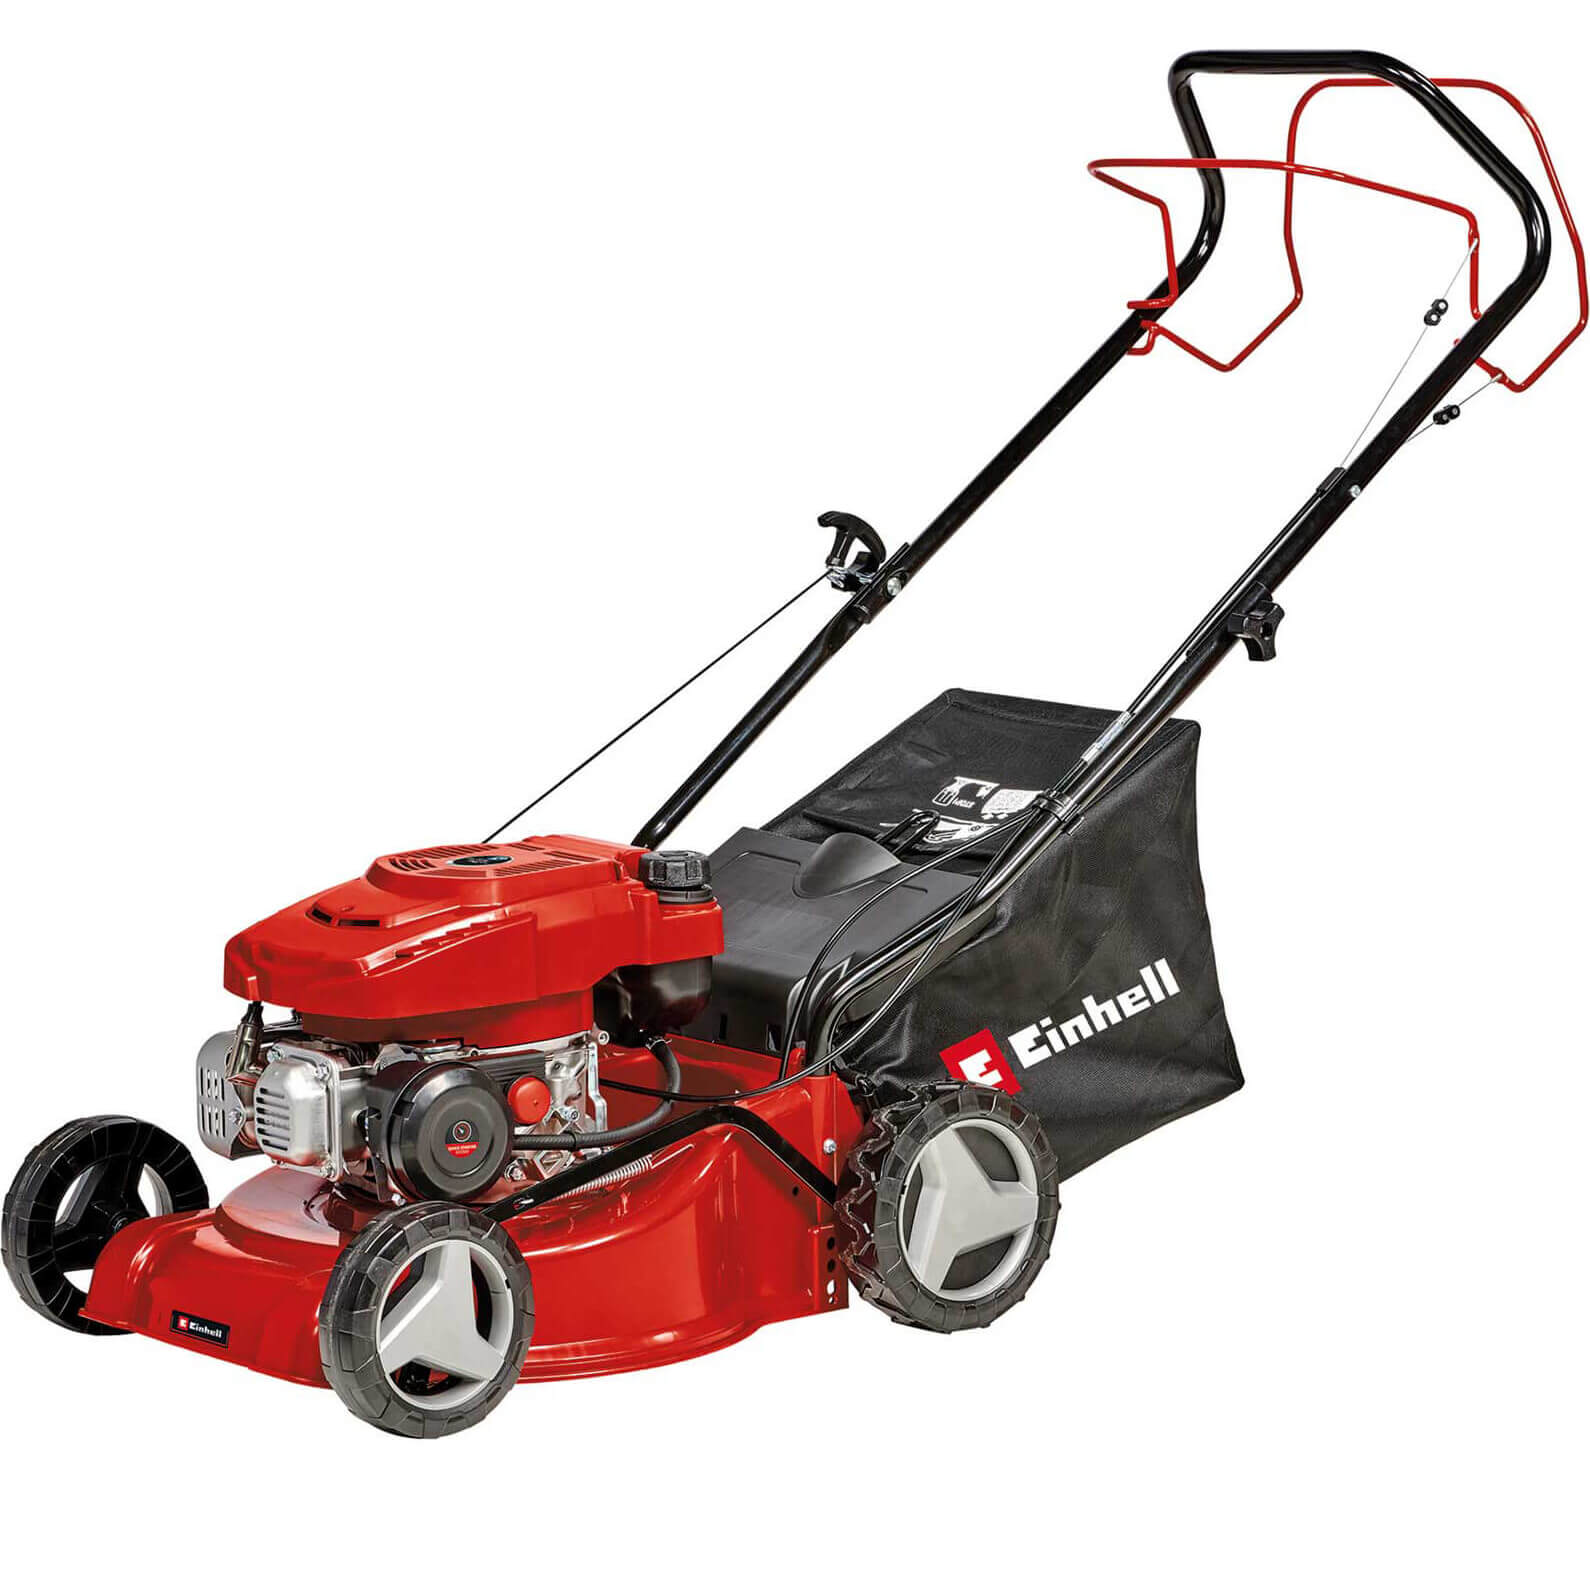 Photo of Einhell Gc-pm 40/2 S Self Propelled Petrol Lawnmower 400mm